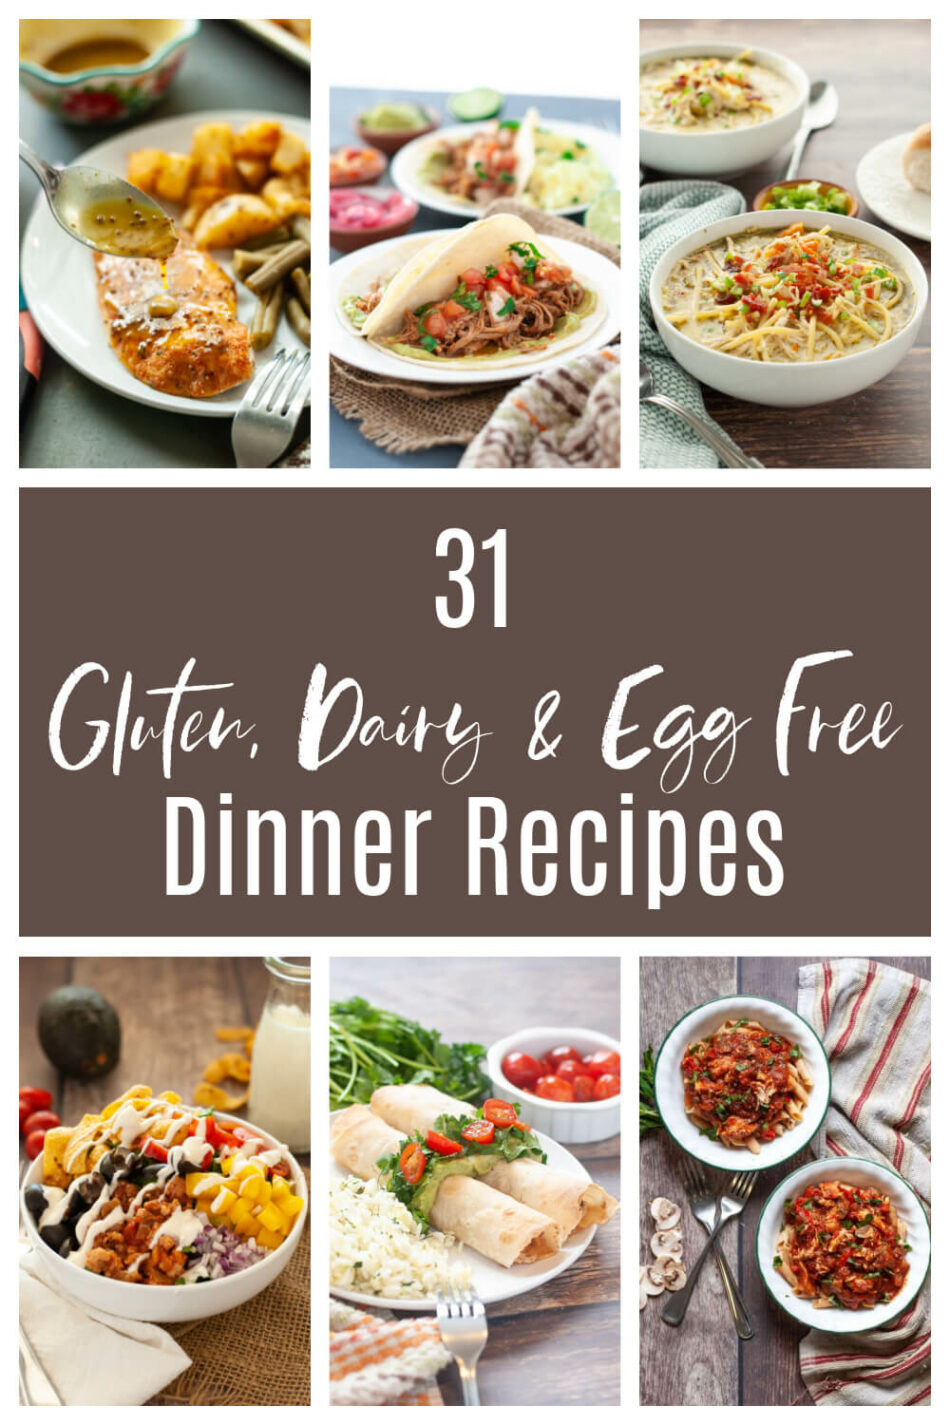 31 Gluten-Free Dairy-Free Egg-Free Dinner Recipes | Allergy Awesomeness